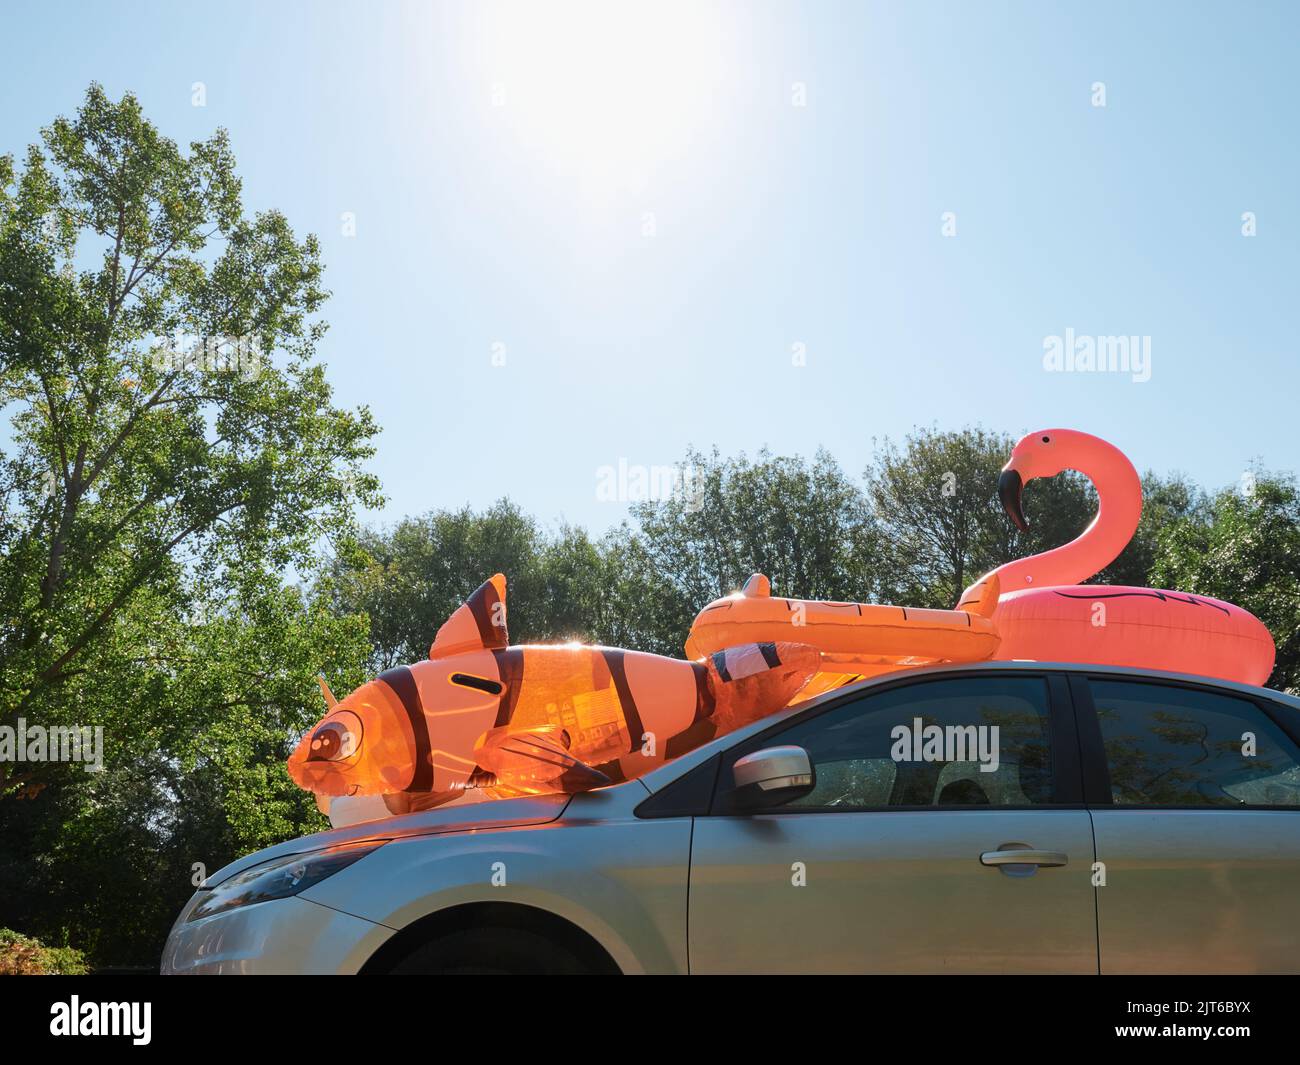 A family car with children's inflatable toys on the roof in a summer car park - summer family holiday car packing - summertime day out - odd quirky Stock Photo